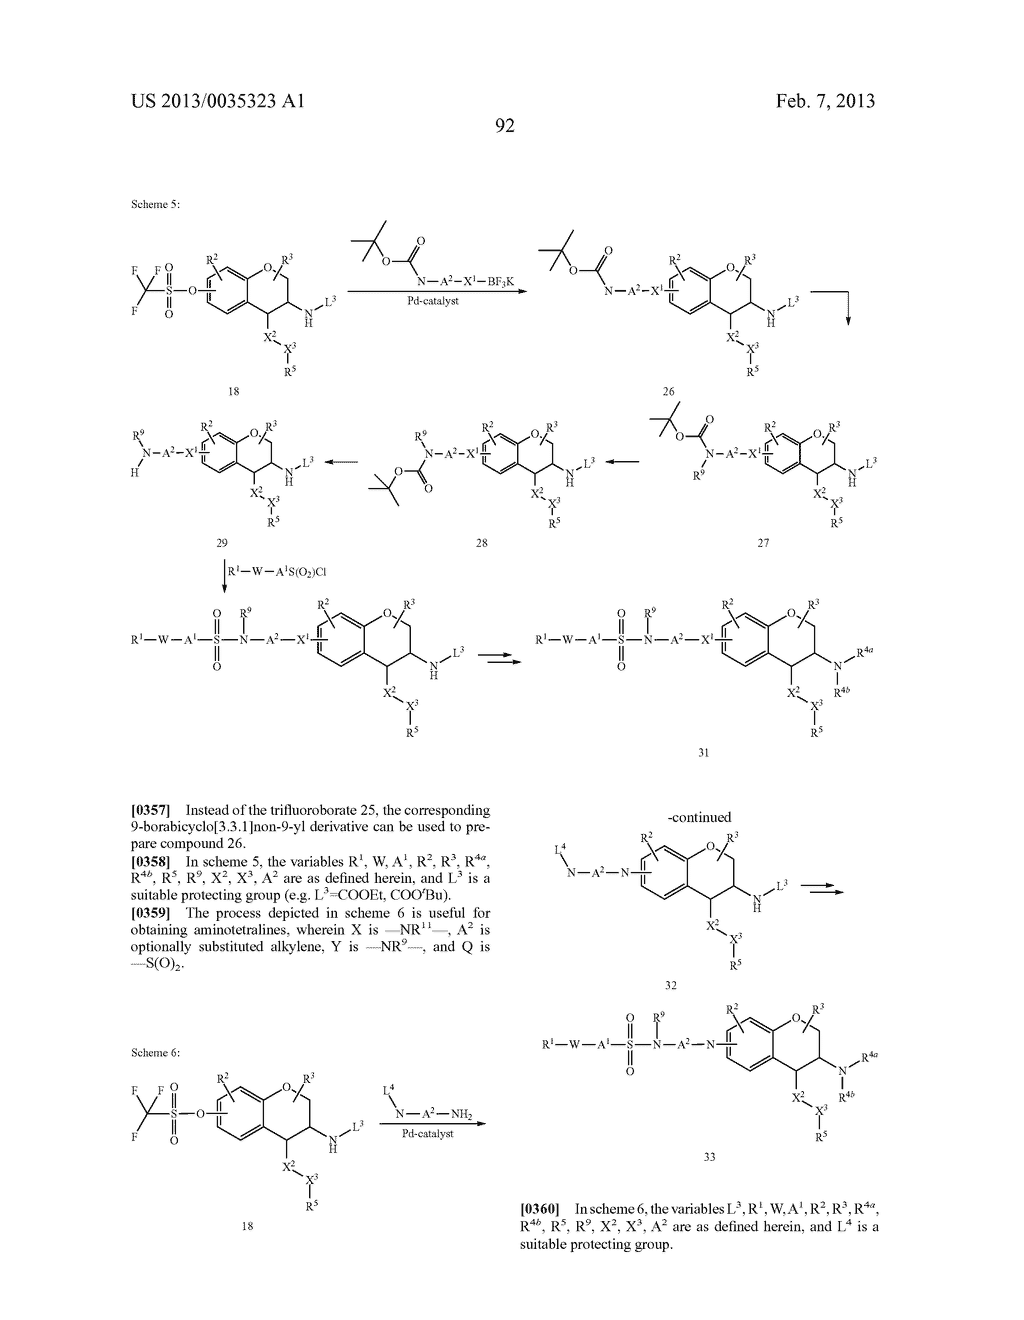 AMINOCHROMANE, AMINOTHIOCHROMANE AND AMINO-1,2,3,4-TETRAHYDROQUINOLINE     DERIVATIVES, PHARMACEUTICAL COMPOSITIONS CONTAINING THEM, AND THEIR USE     IN THERAPY - diagram, schematic, and image 93